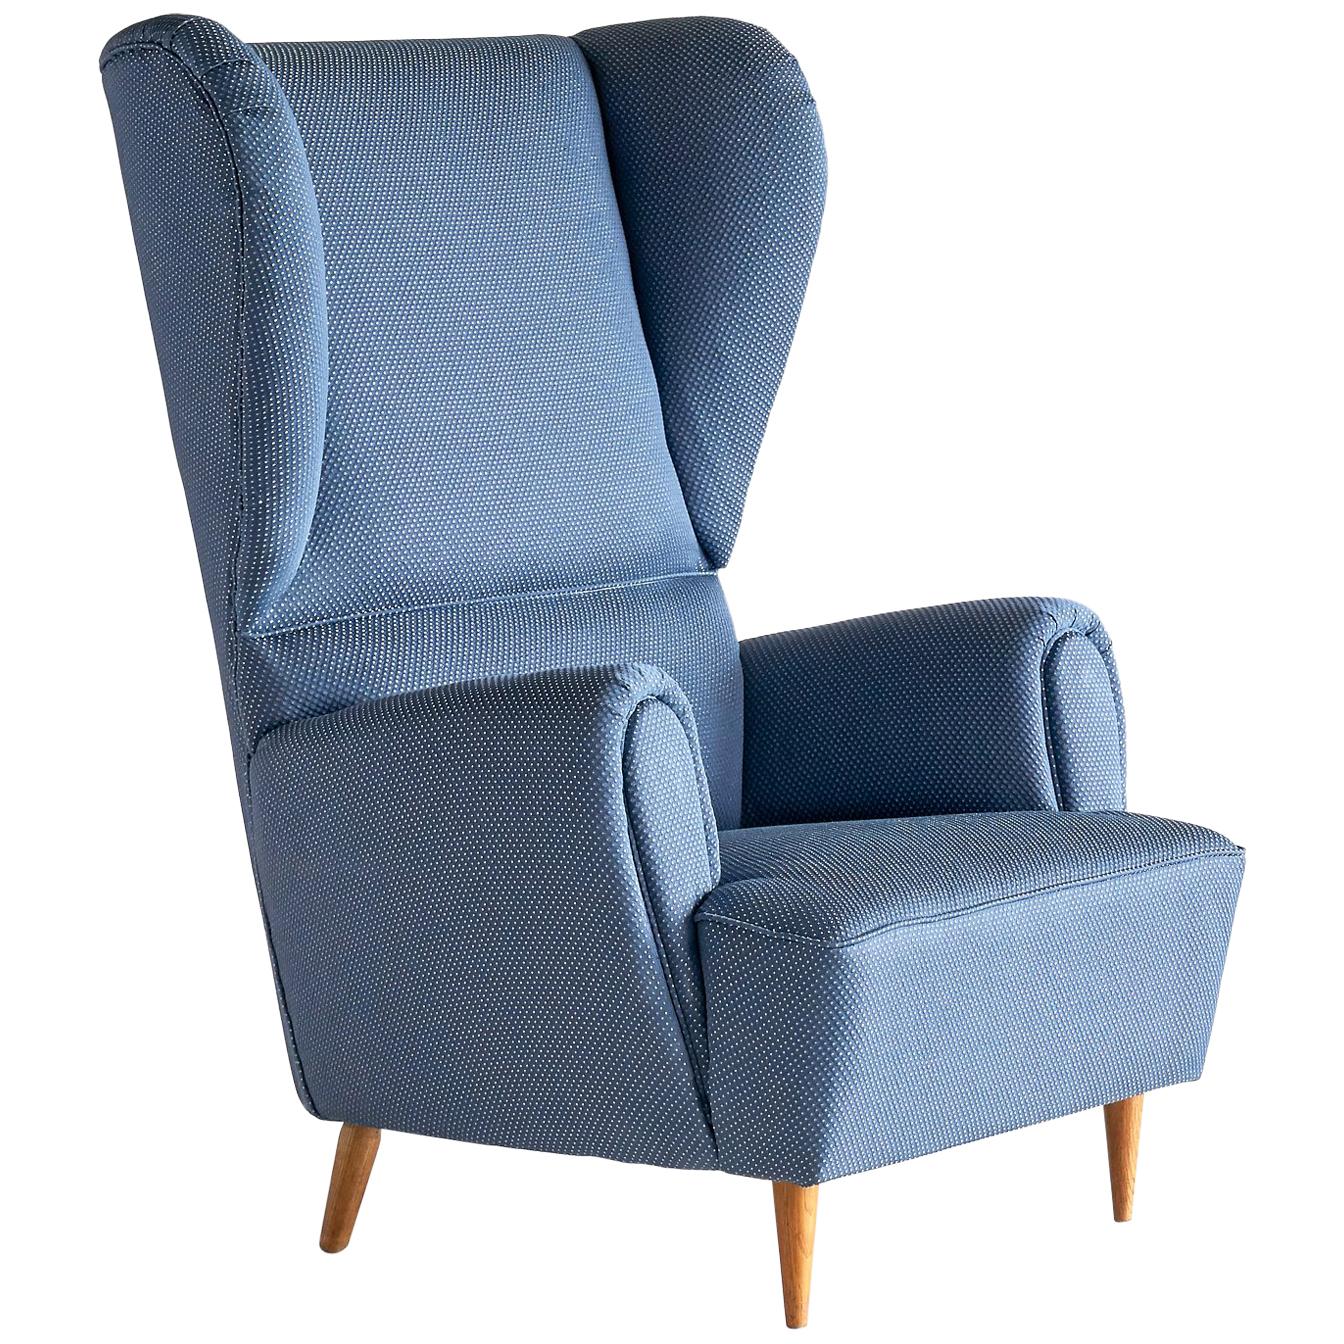 Paolo Buffa High Wingback Chair Upholstered in Blue Rubelli Fabric, Italy, 1940s